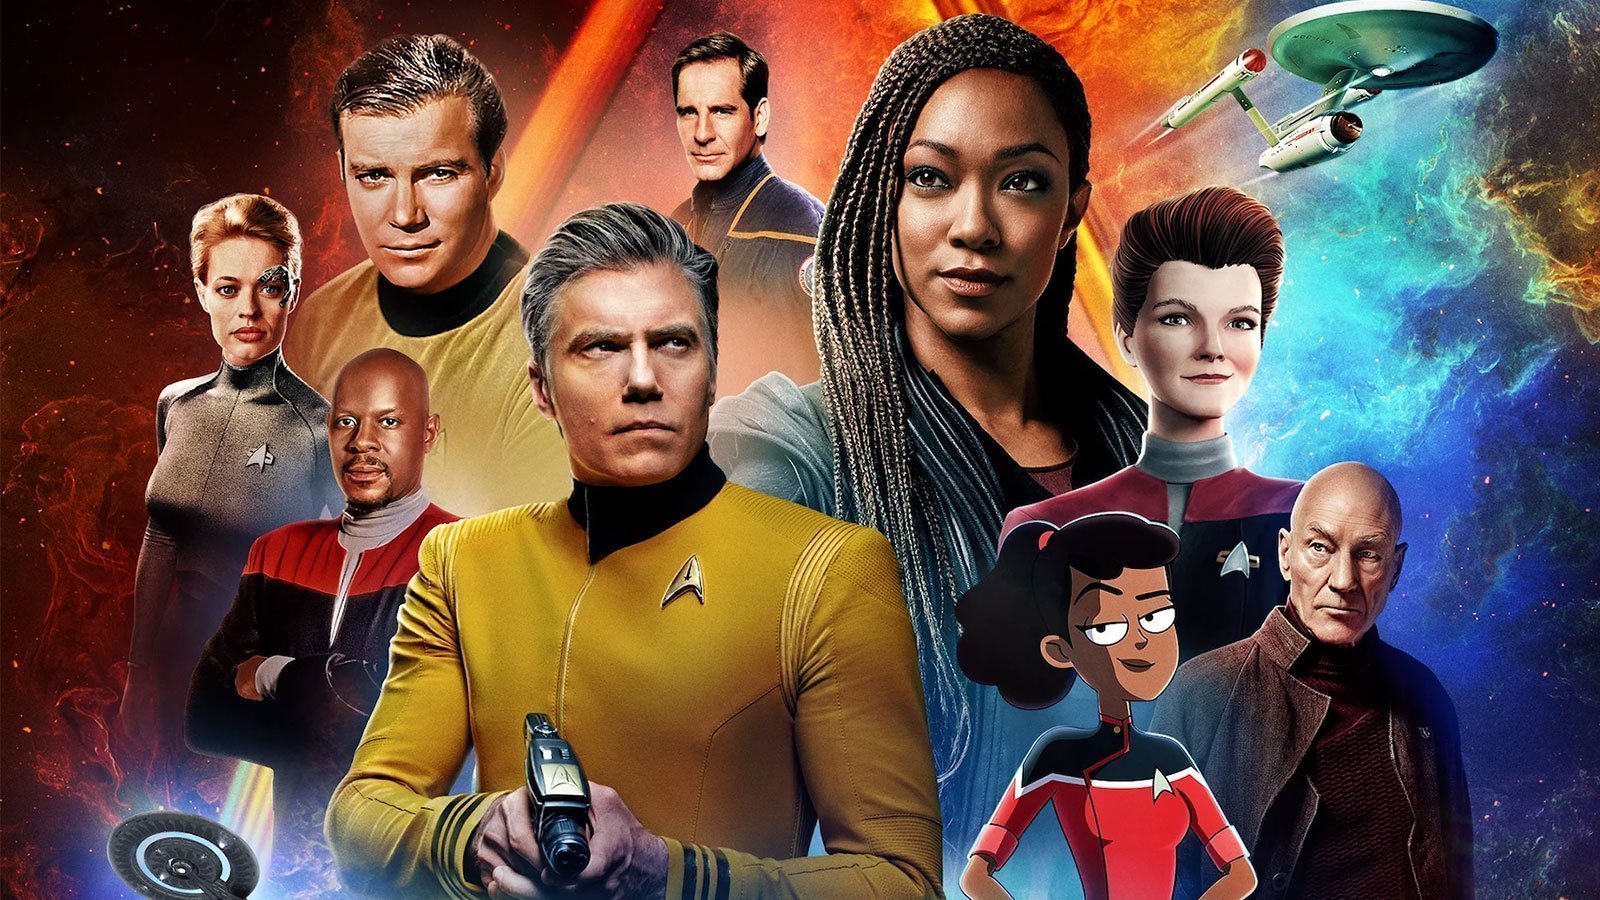 Star Trek' Day bursting with cast news, teasers and announcements